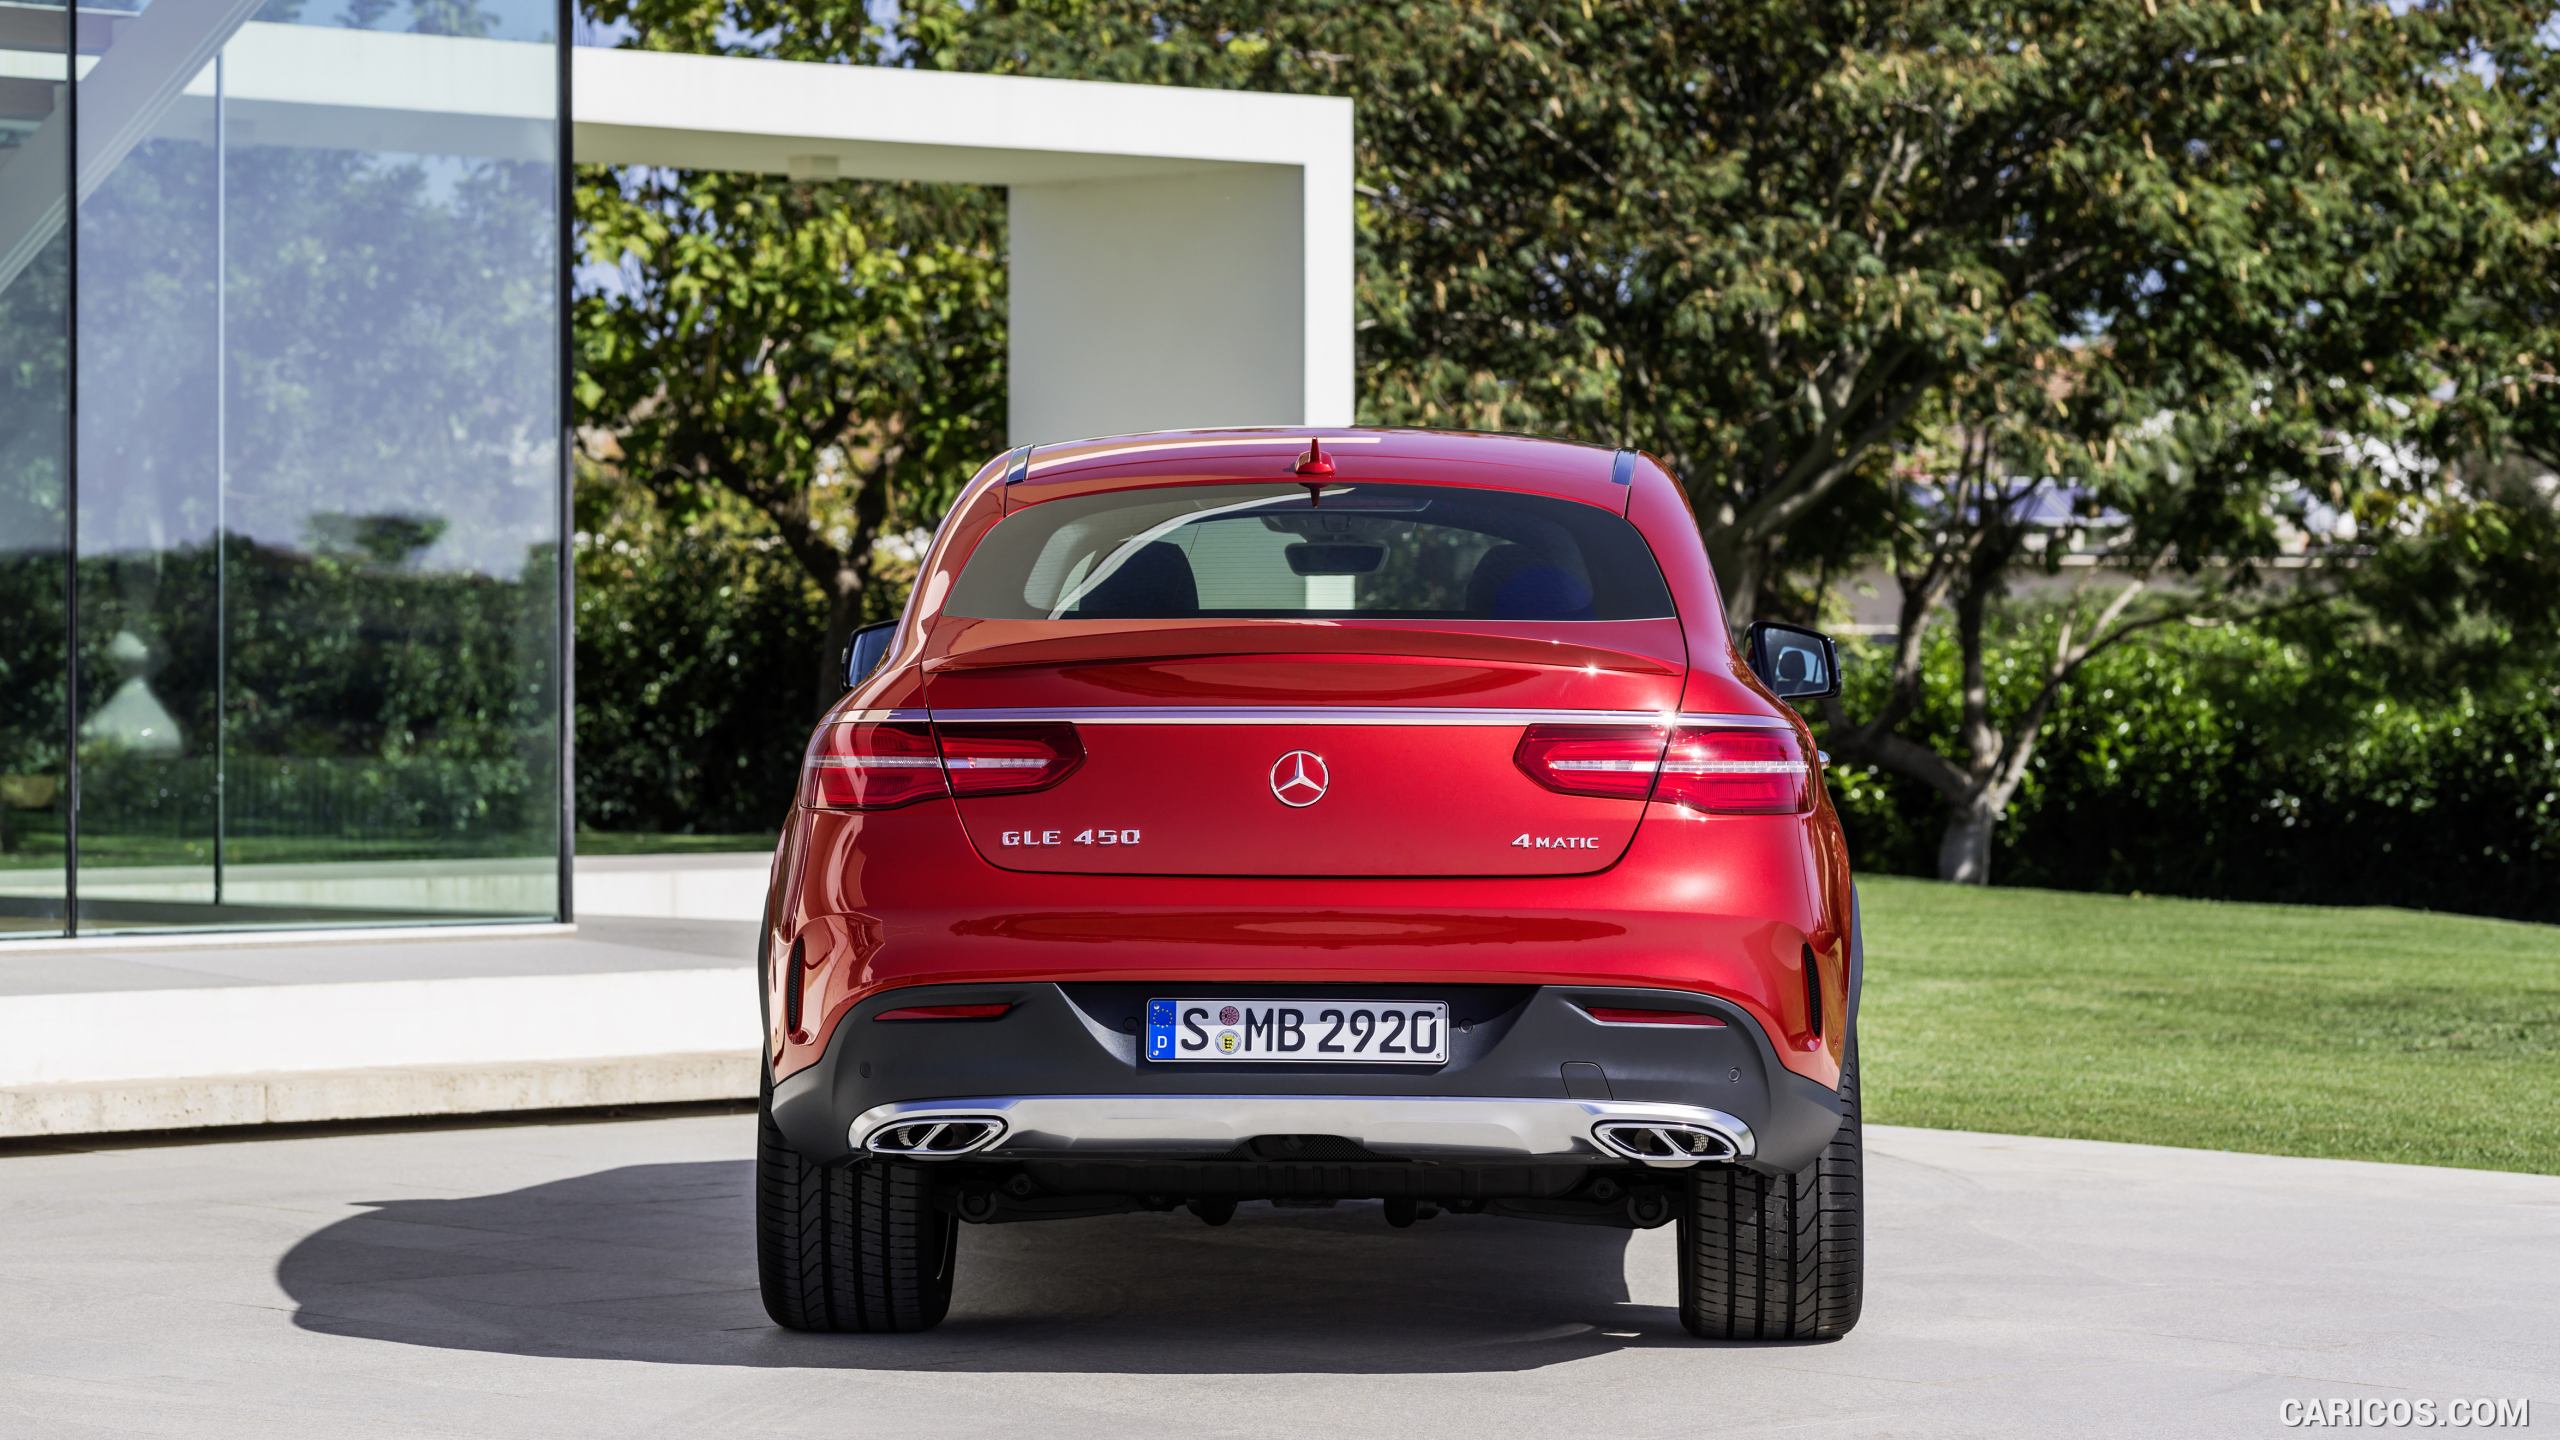 2016 Mercedes-Benz GLE 450 AMG Coupe 4MATIC (Designo Hyacinth Red Metallic) - Rear, #8 of 115